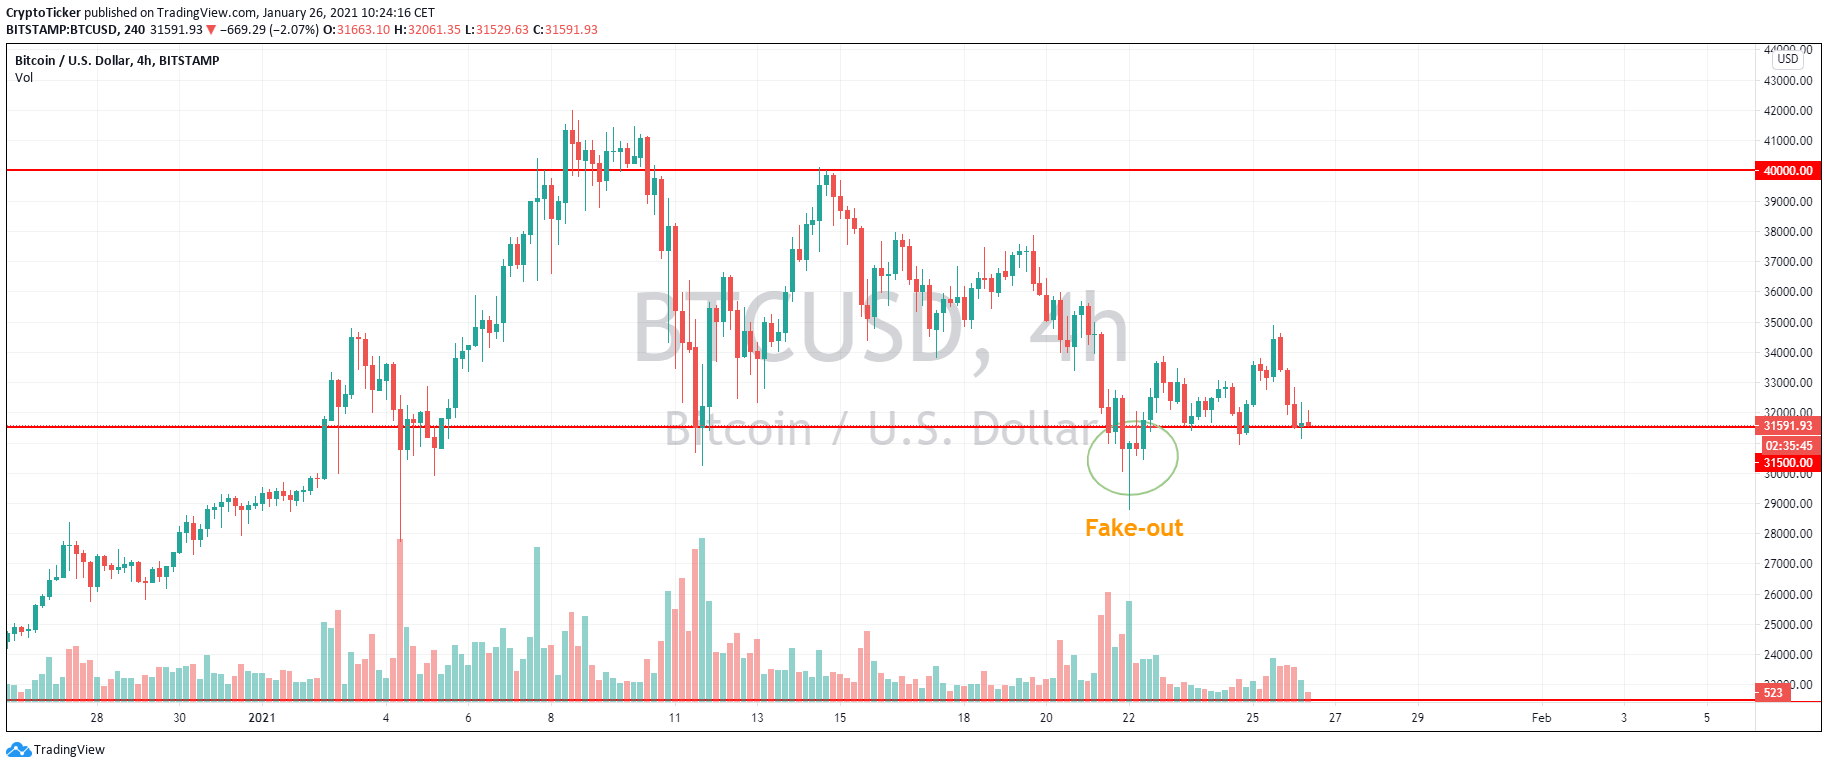 BTC/USD 4-hour chart showing a price consolidation